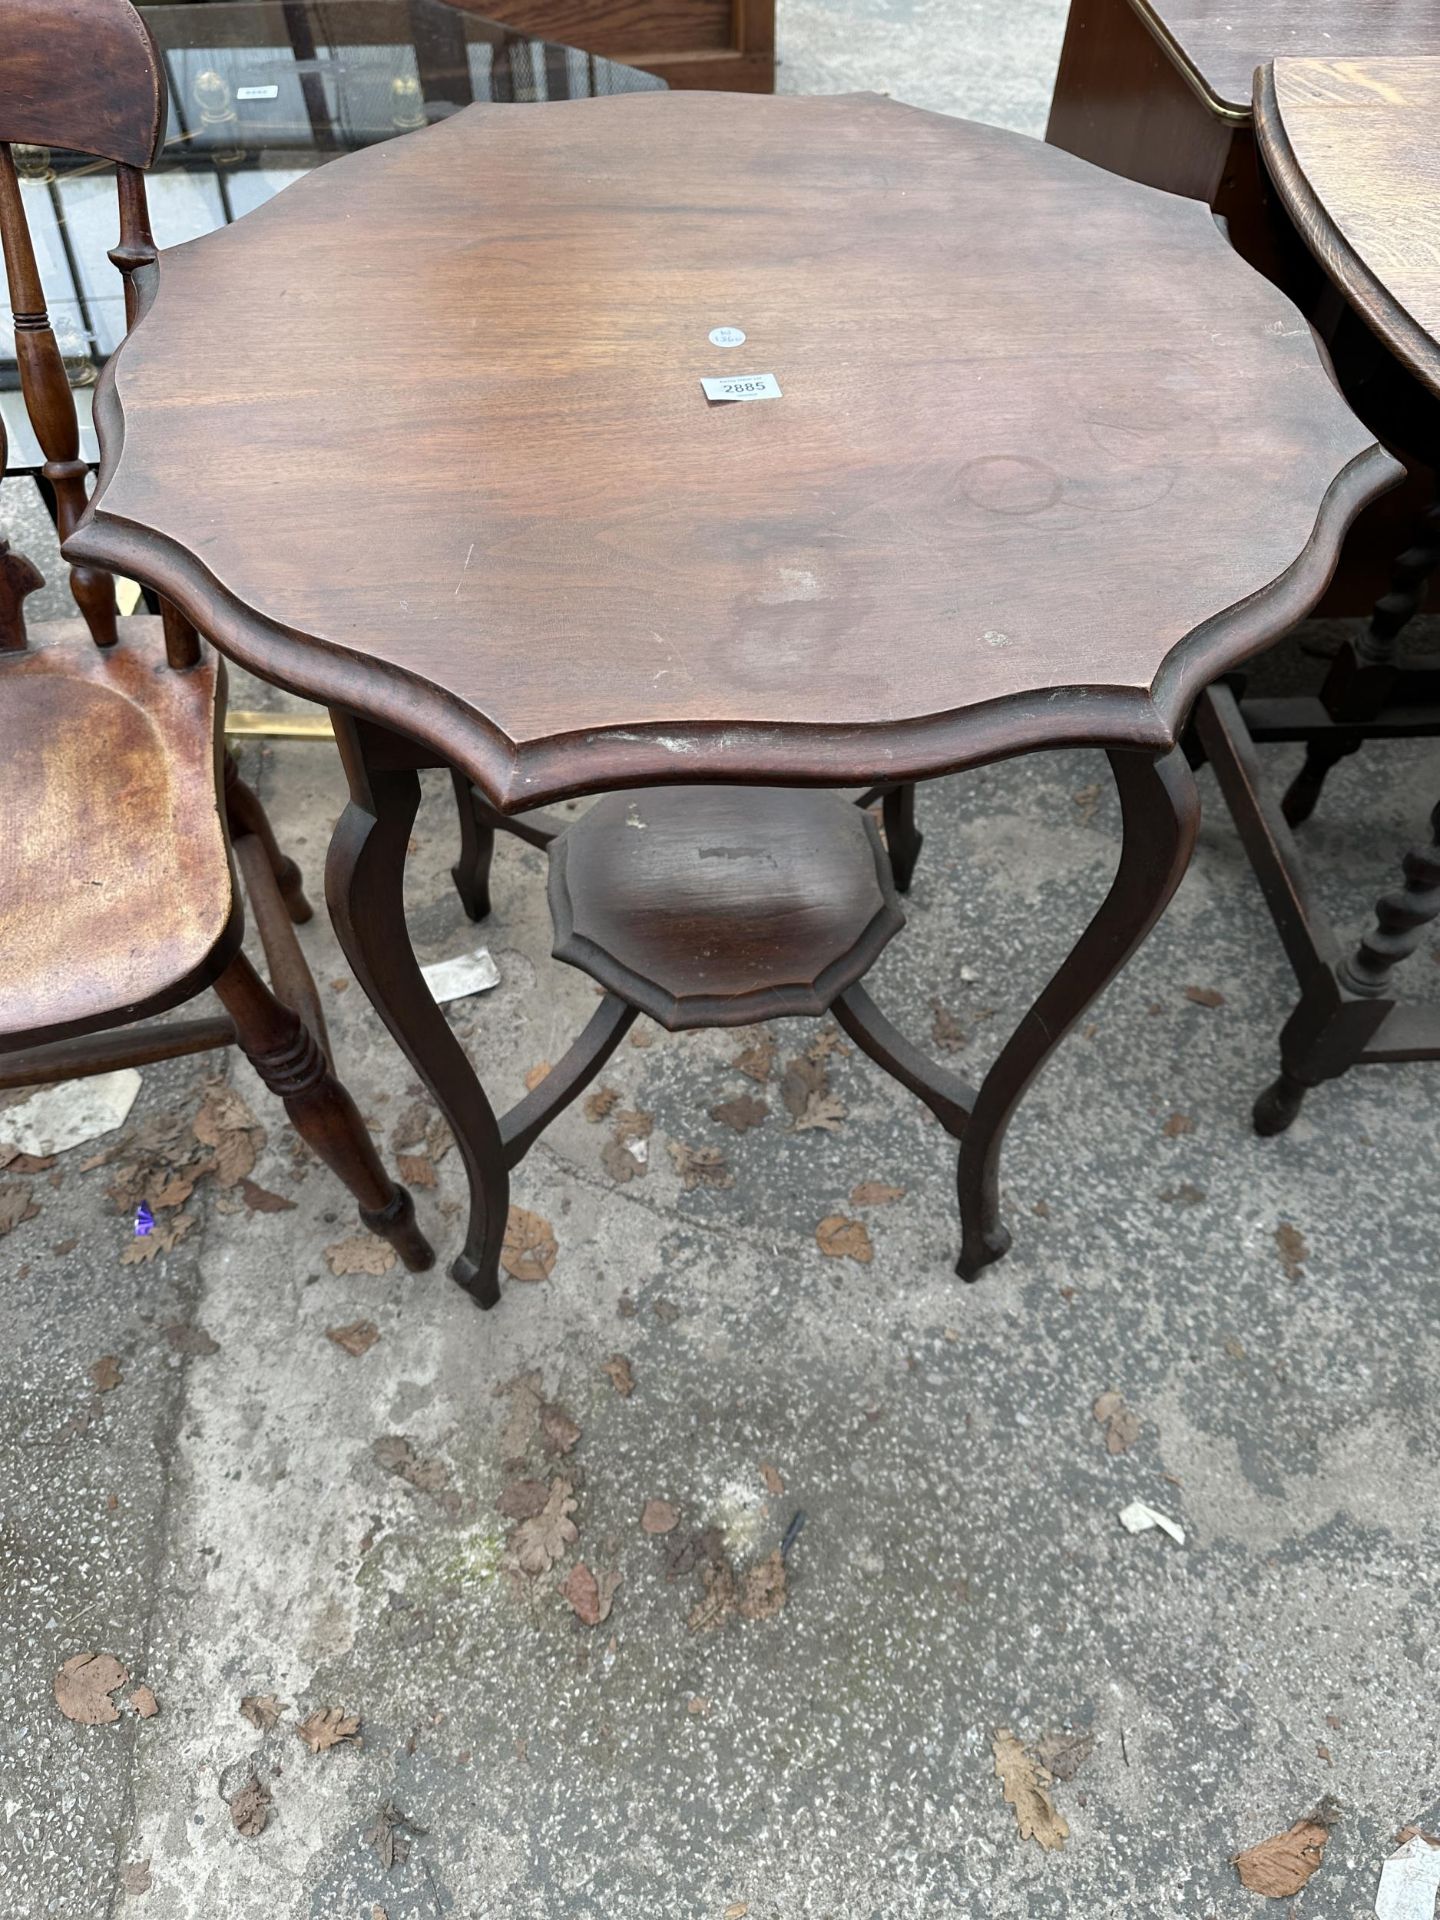 A LATE VICTORIAN MAHOGANY TWO TIER CENTRE TABLE 27" ACROSS